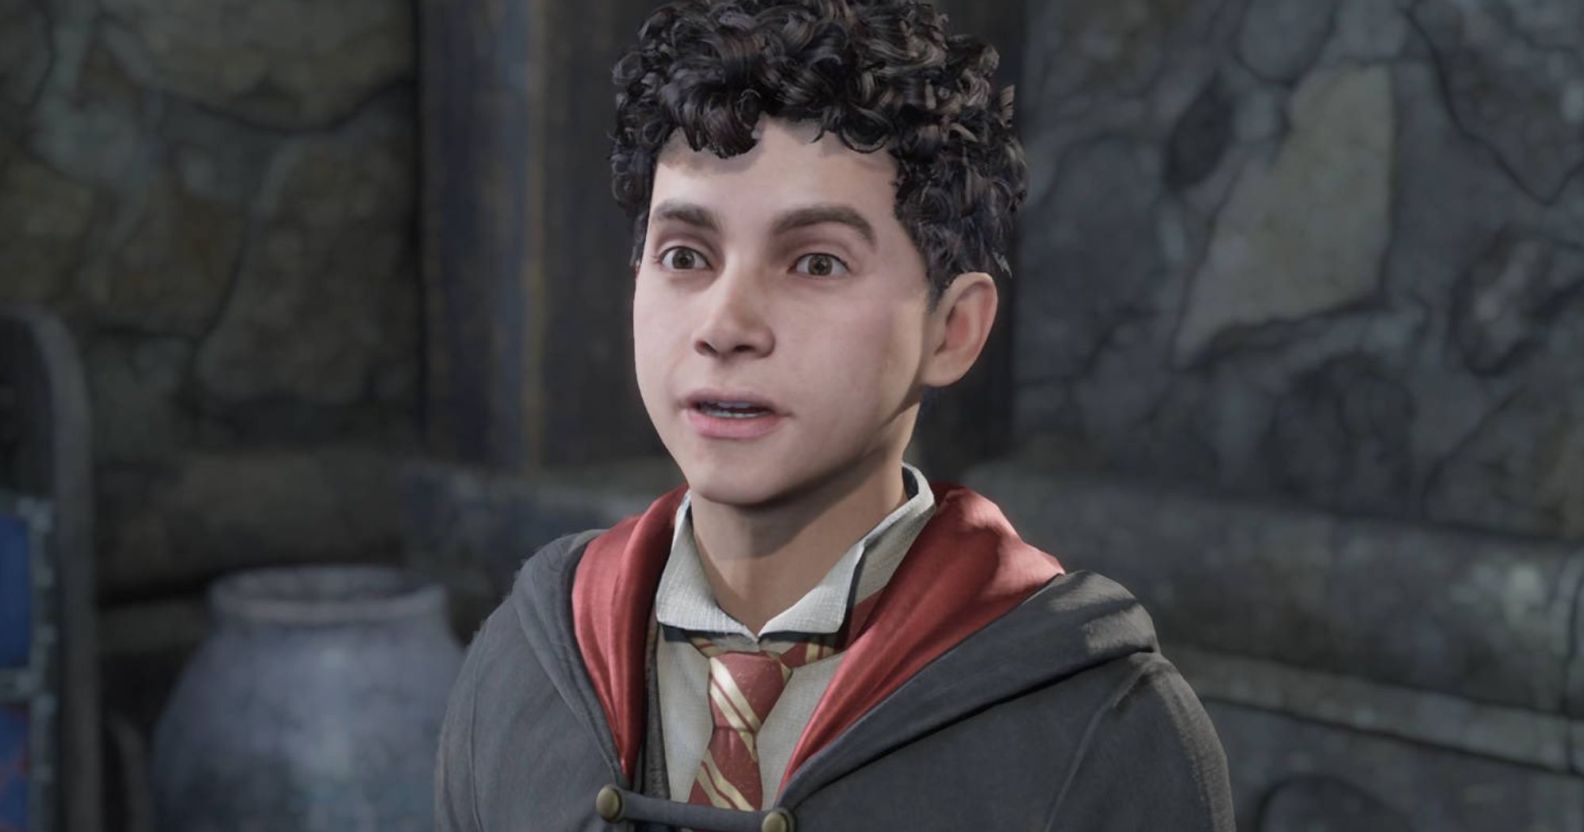 A custom character from the video game Hogwarts Legacy.